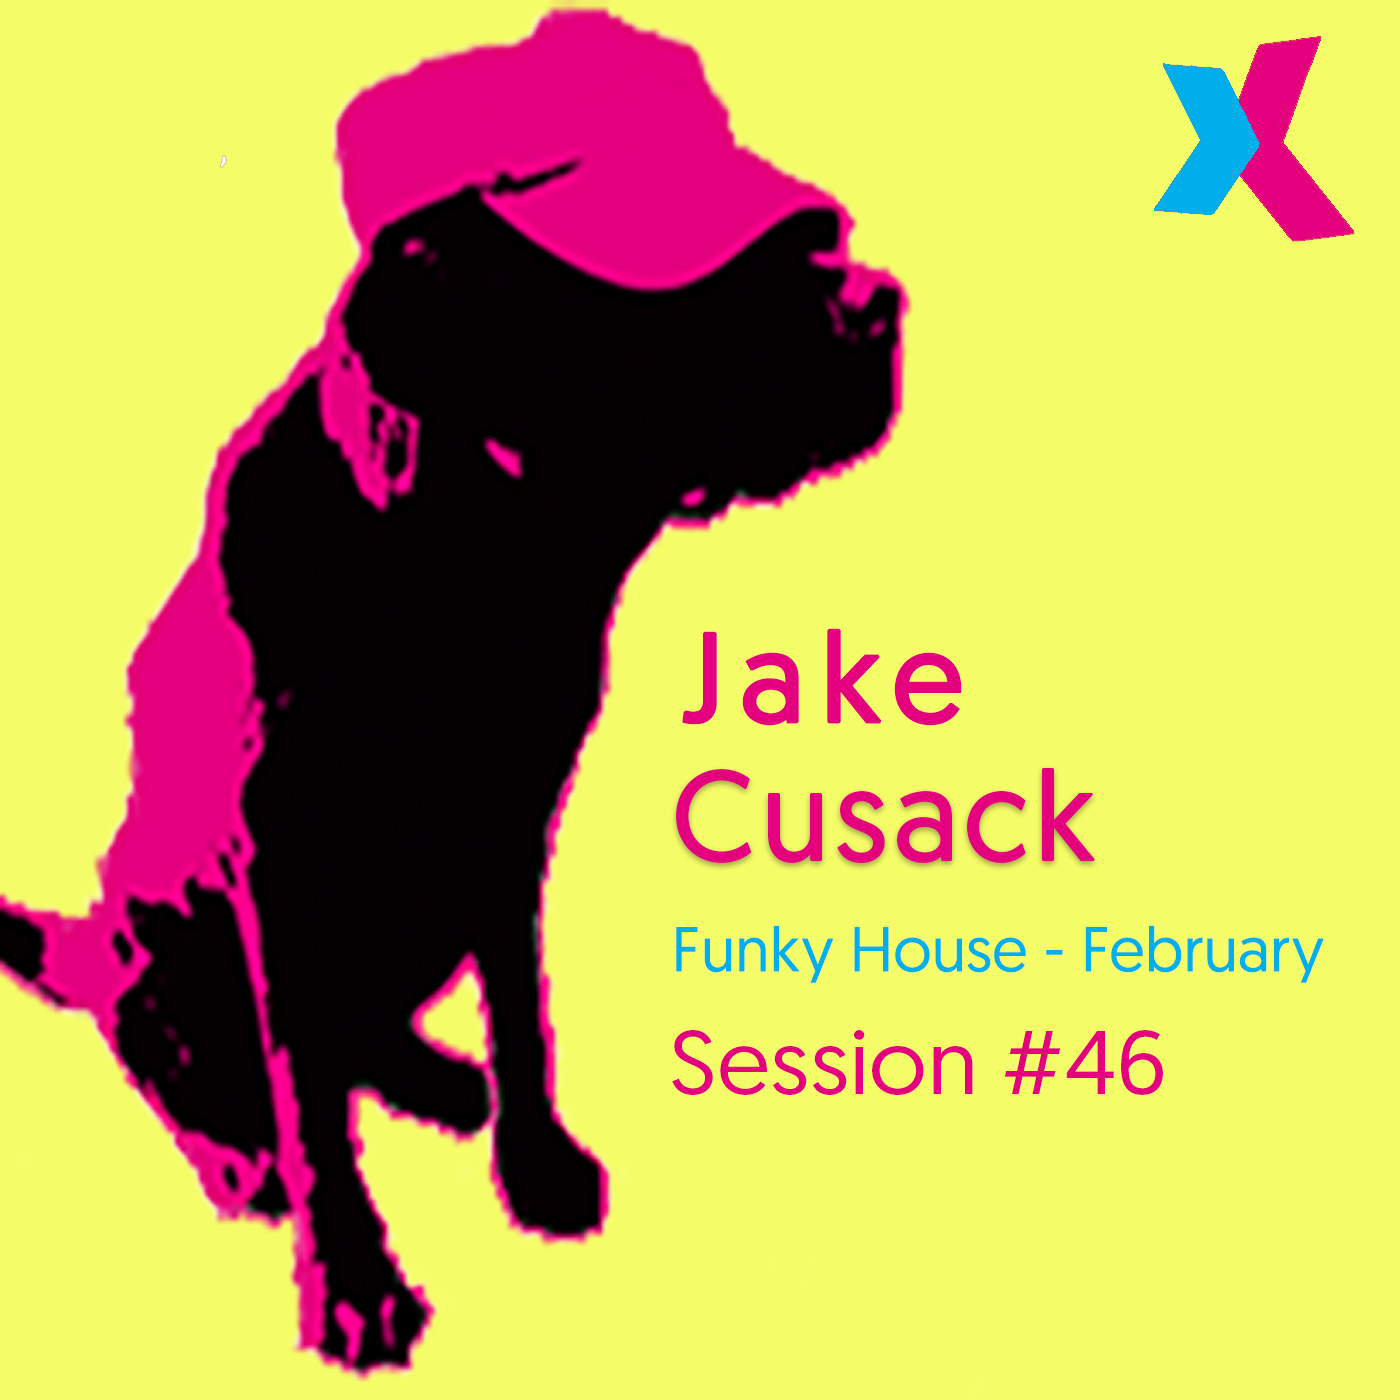 Jake Cusack - Funky House - February - Session 46